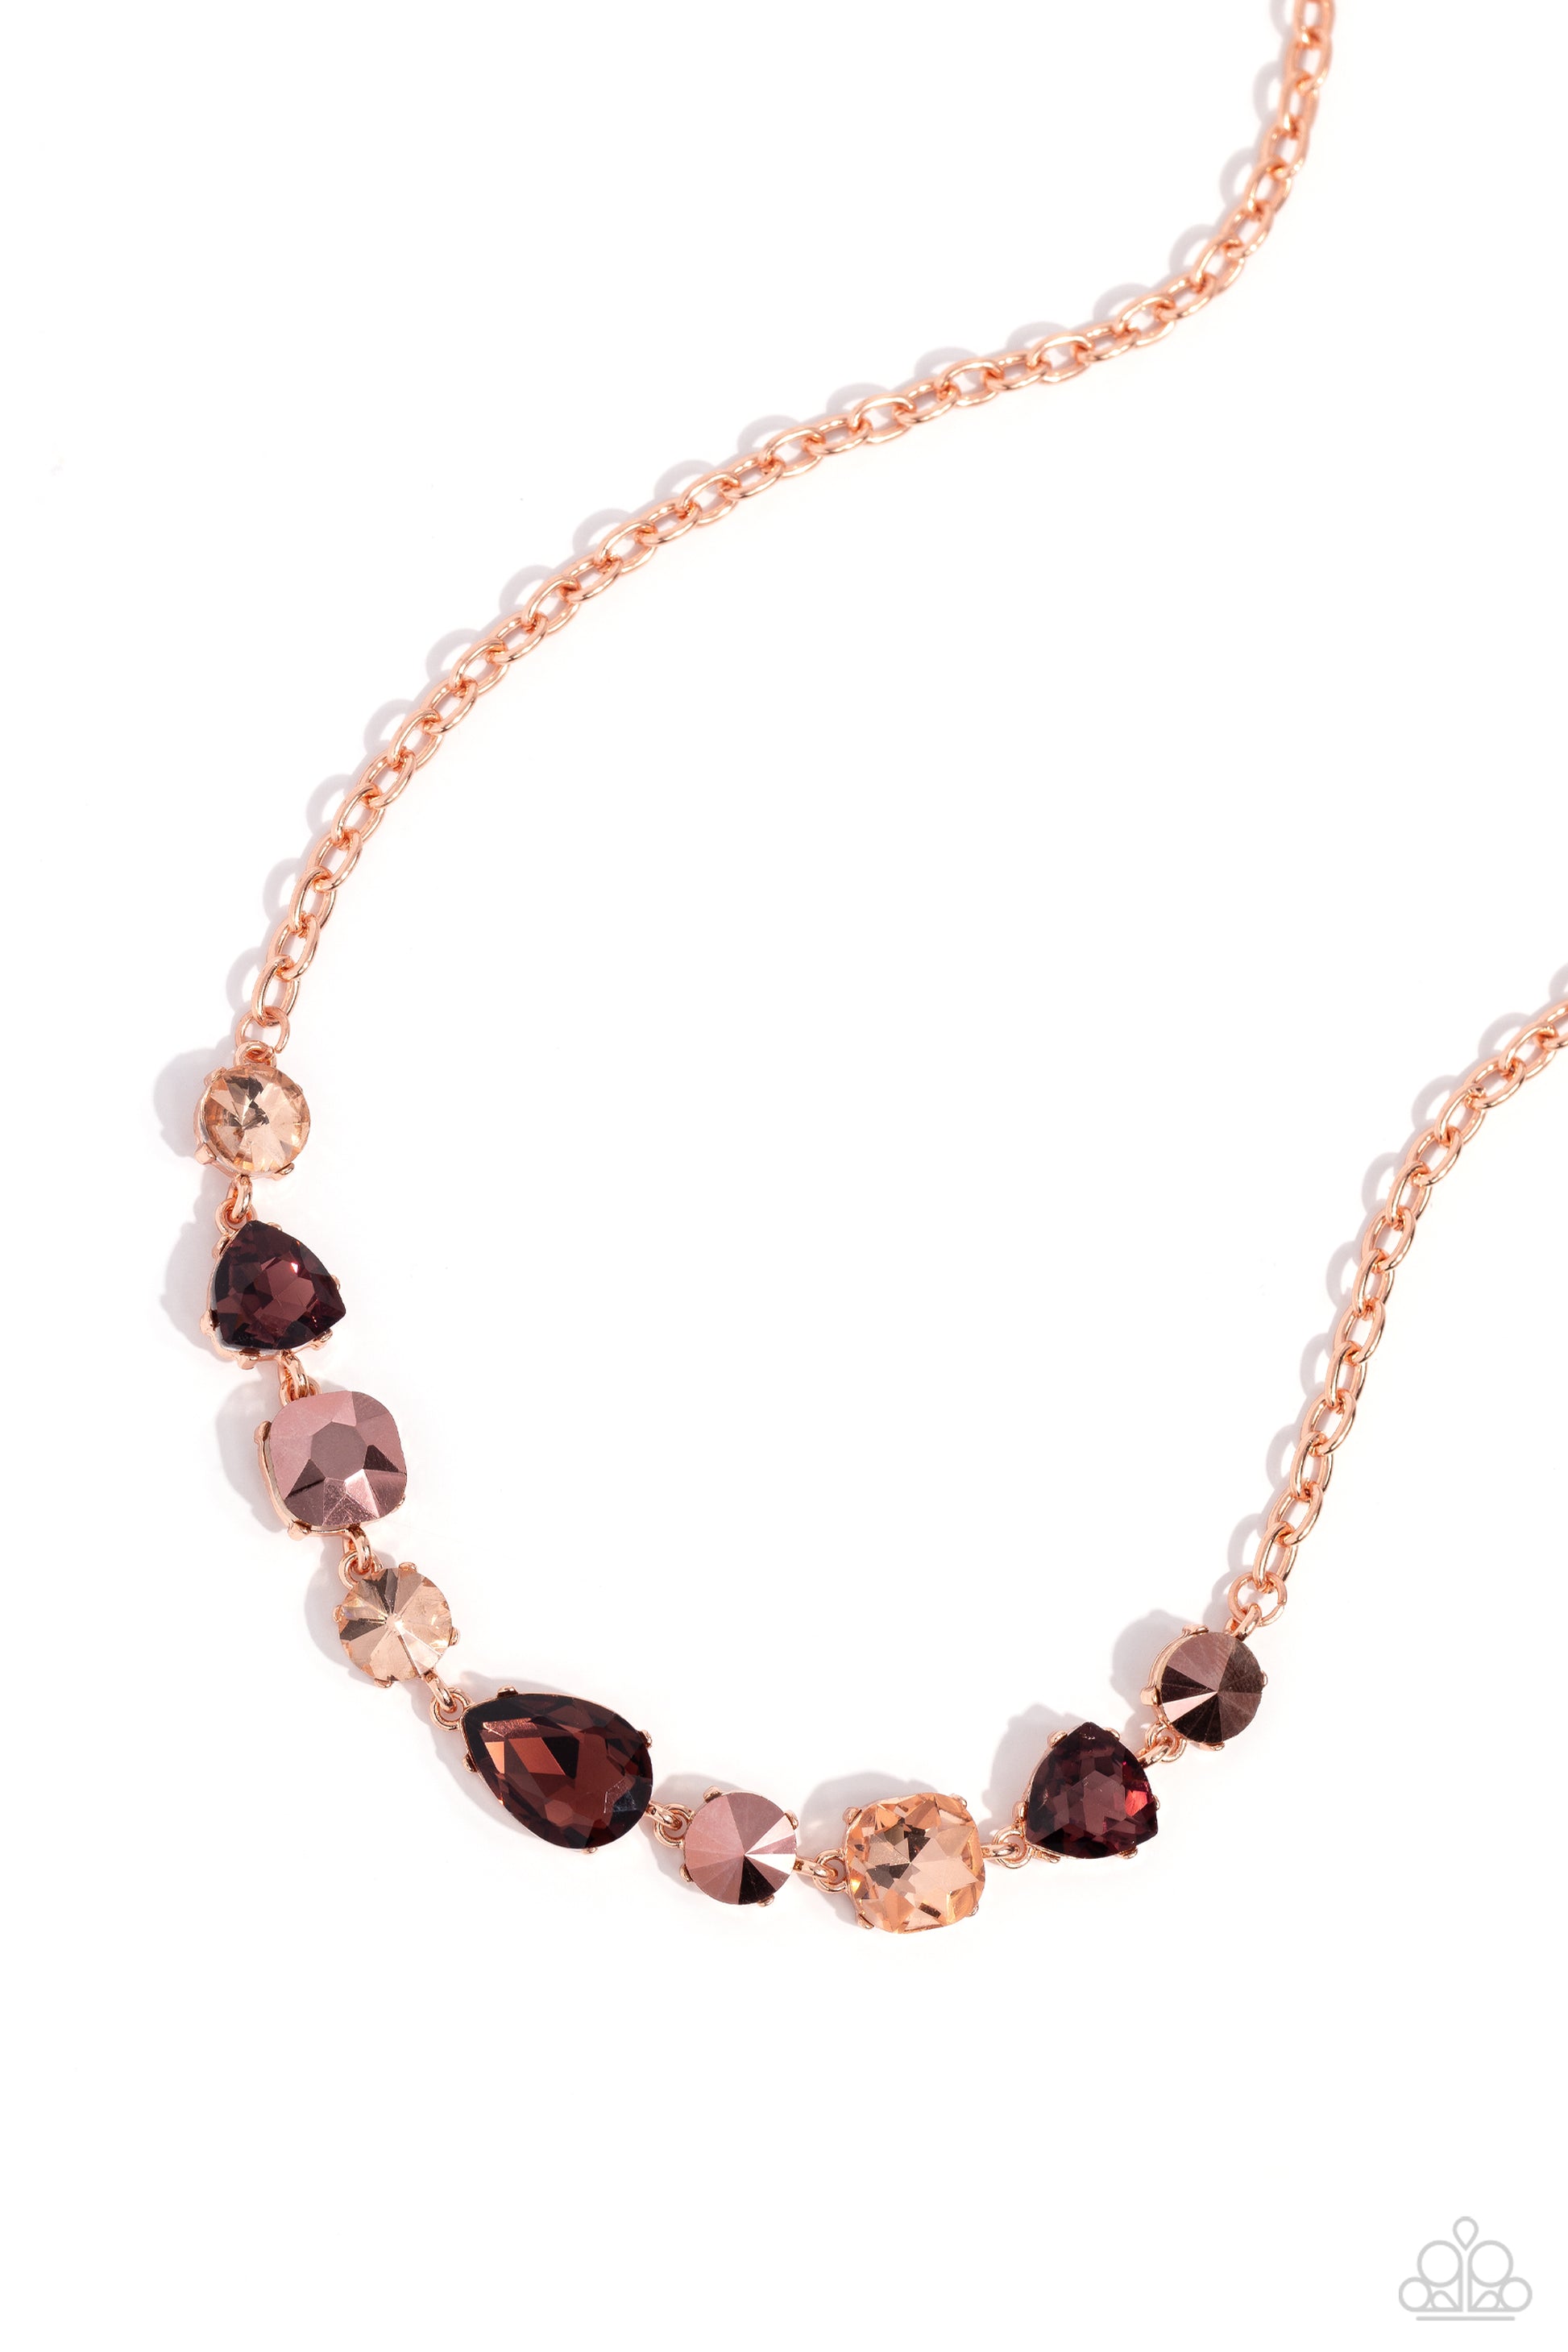 Paparazzi Accessories - Emphatic Edge - Copper Necgeometrset in shiny copper-pronged fittings, glittering geometric copper aurum, topaz, and peachy gem and acrylic shapes delicately coalesce around the collar on a sleek shiny copper chain for an edgy statement. Features an adjustable clasp closure.  Sold as one individual necklace. Includes one pair of matching earrings.  Order date 11/1/23